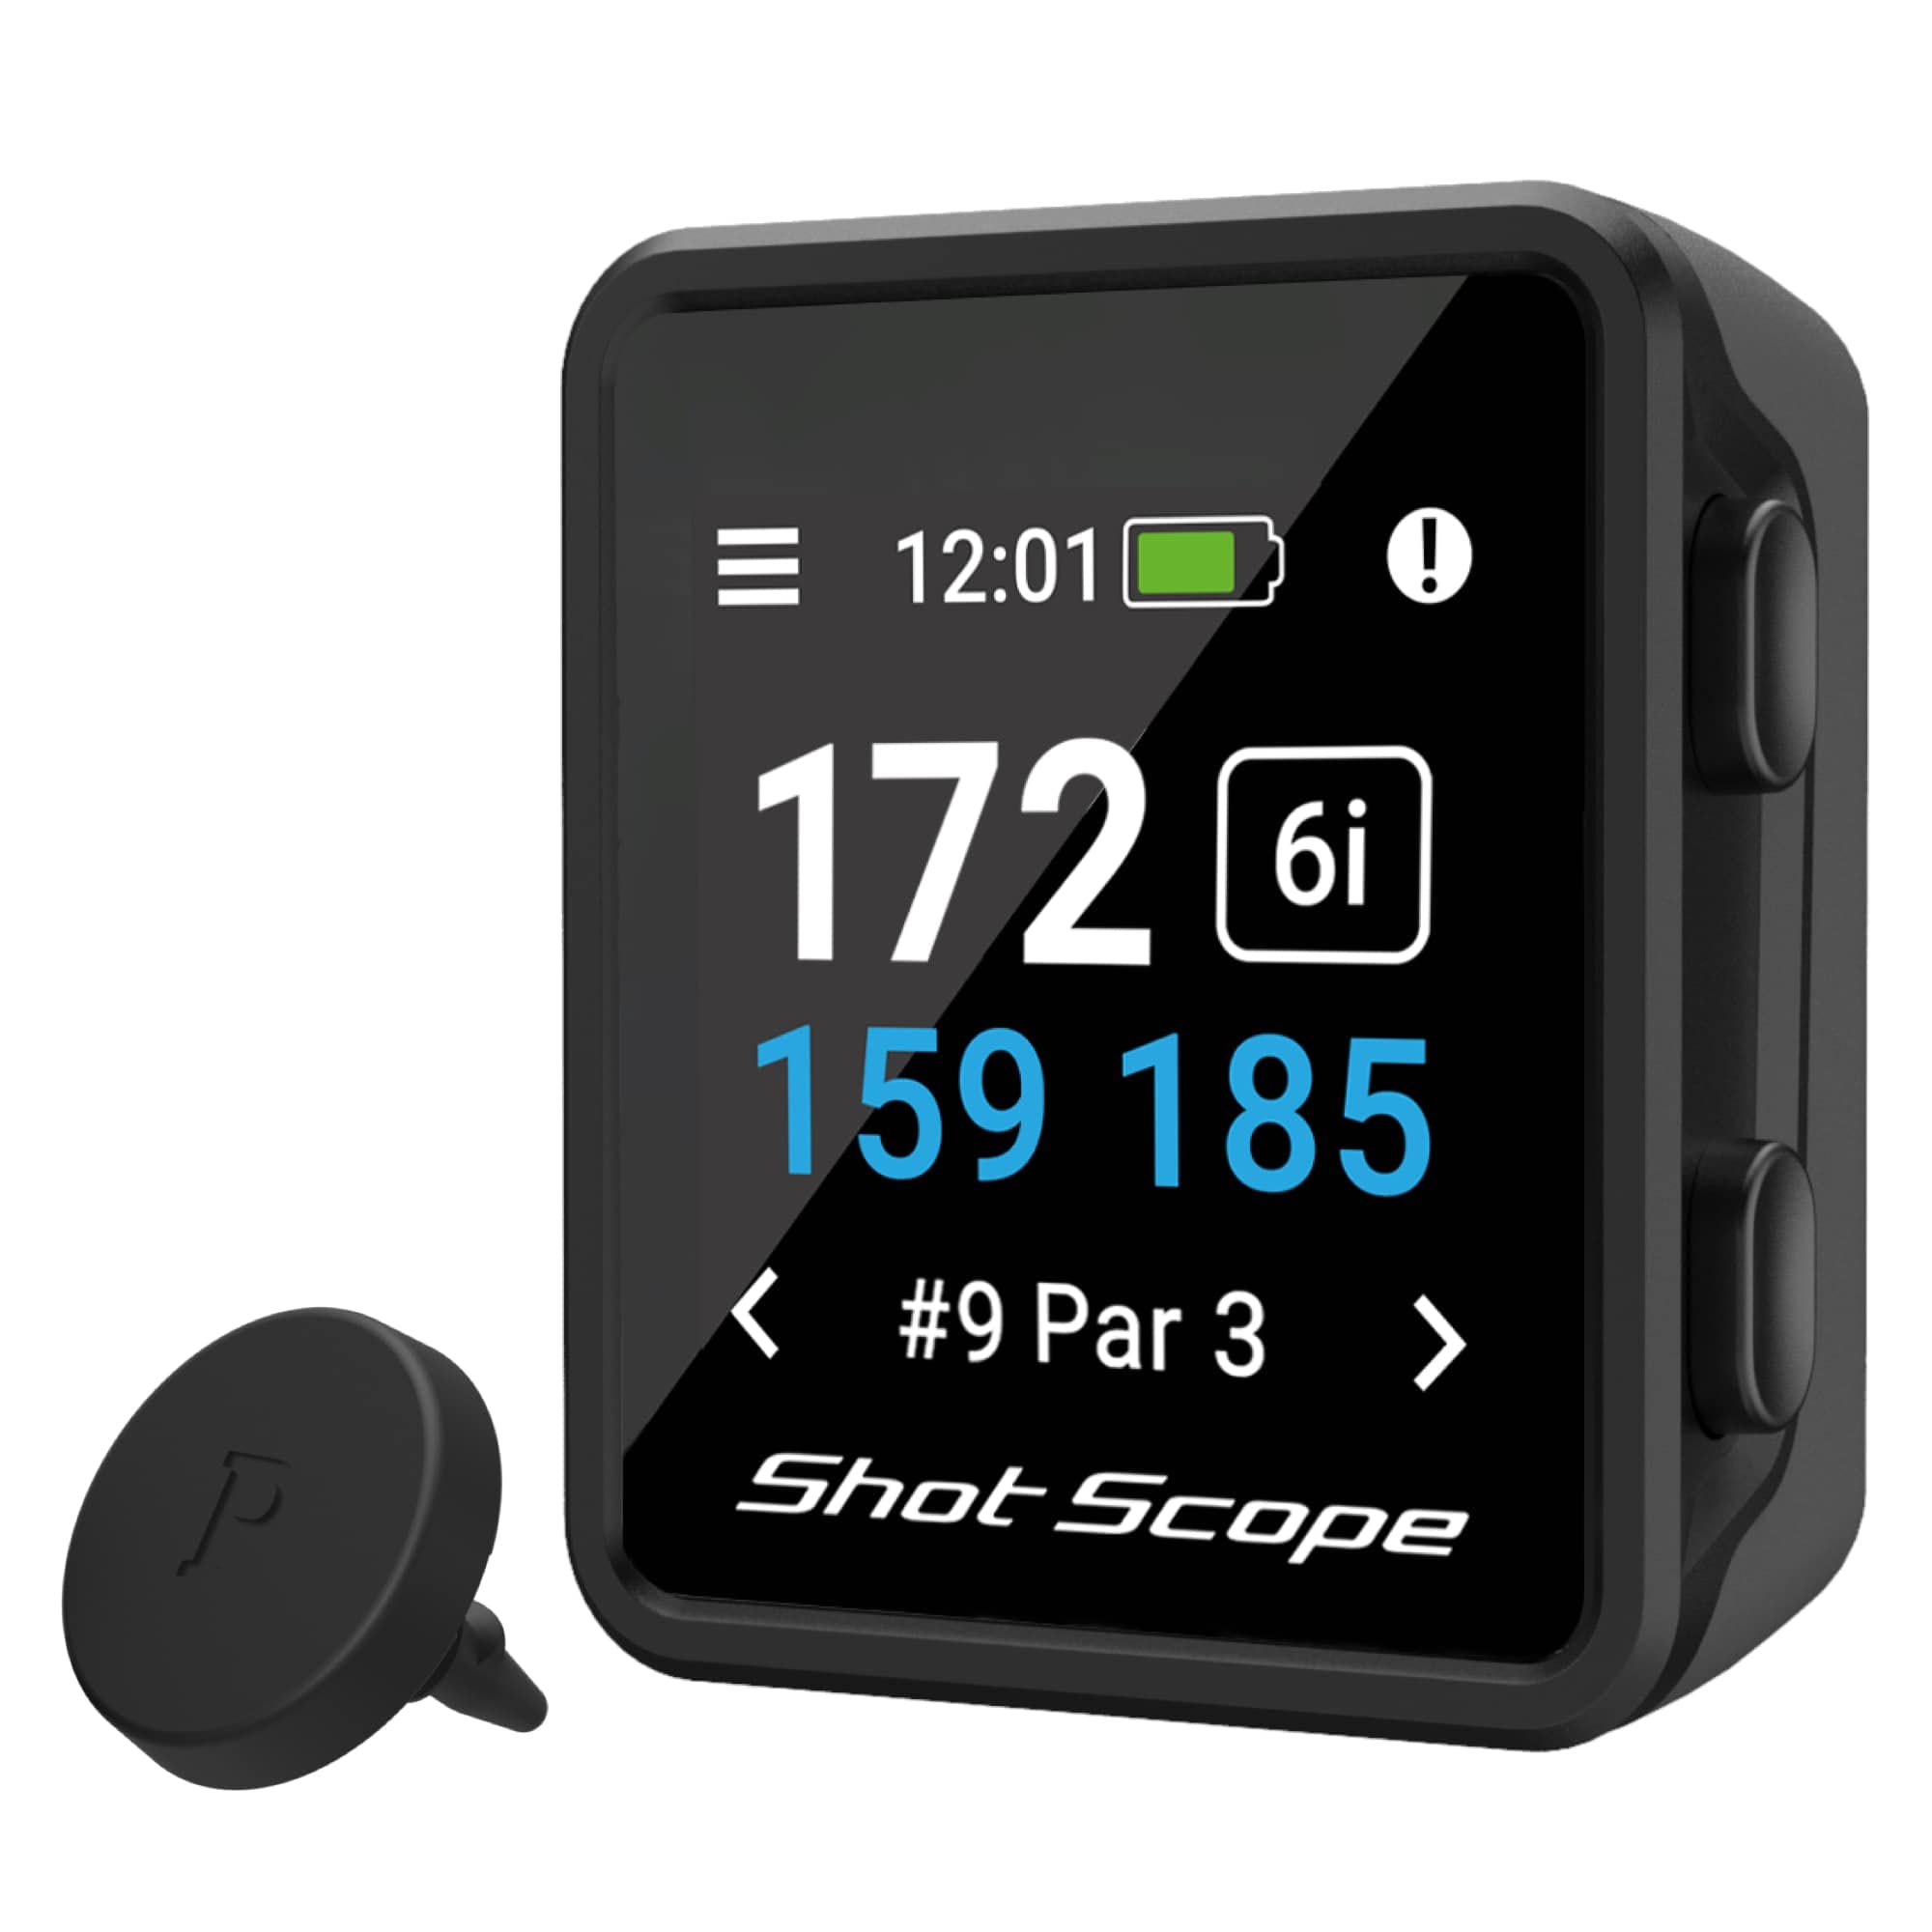 Shot Scope Technologies Shot Scope H4 GPS Handheld with Shot Tracking - F/M/B Green and Hazard Distances - 36,000+ pre-Loaded Courses - 100+ Statistics Including Strokes Gained - No subscriptions